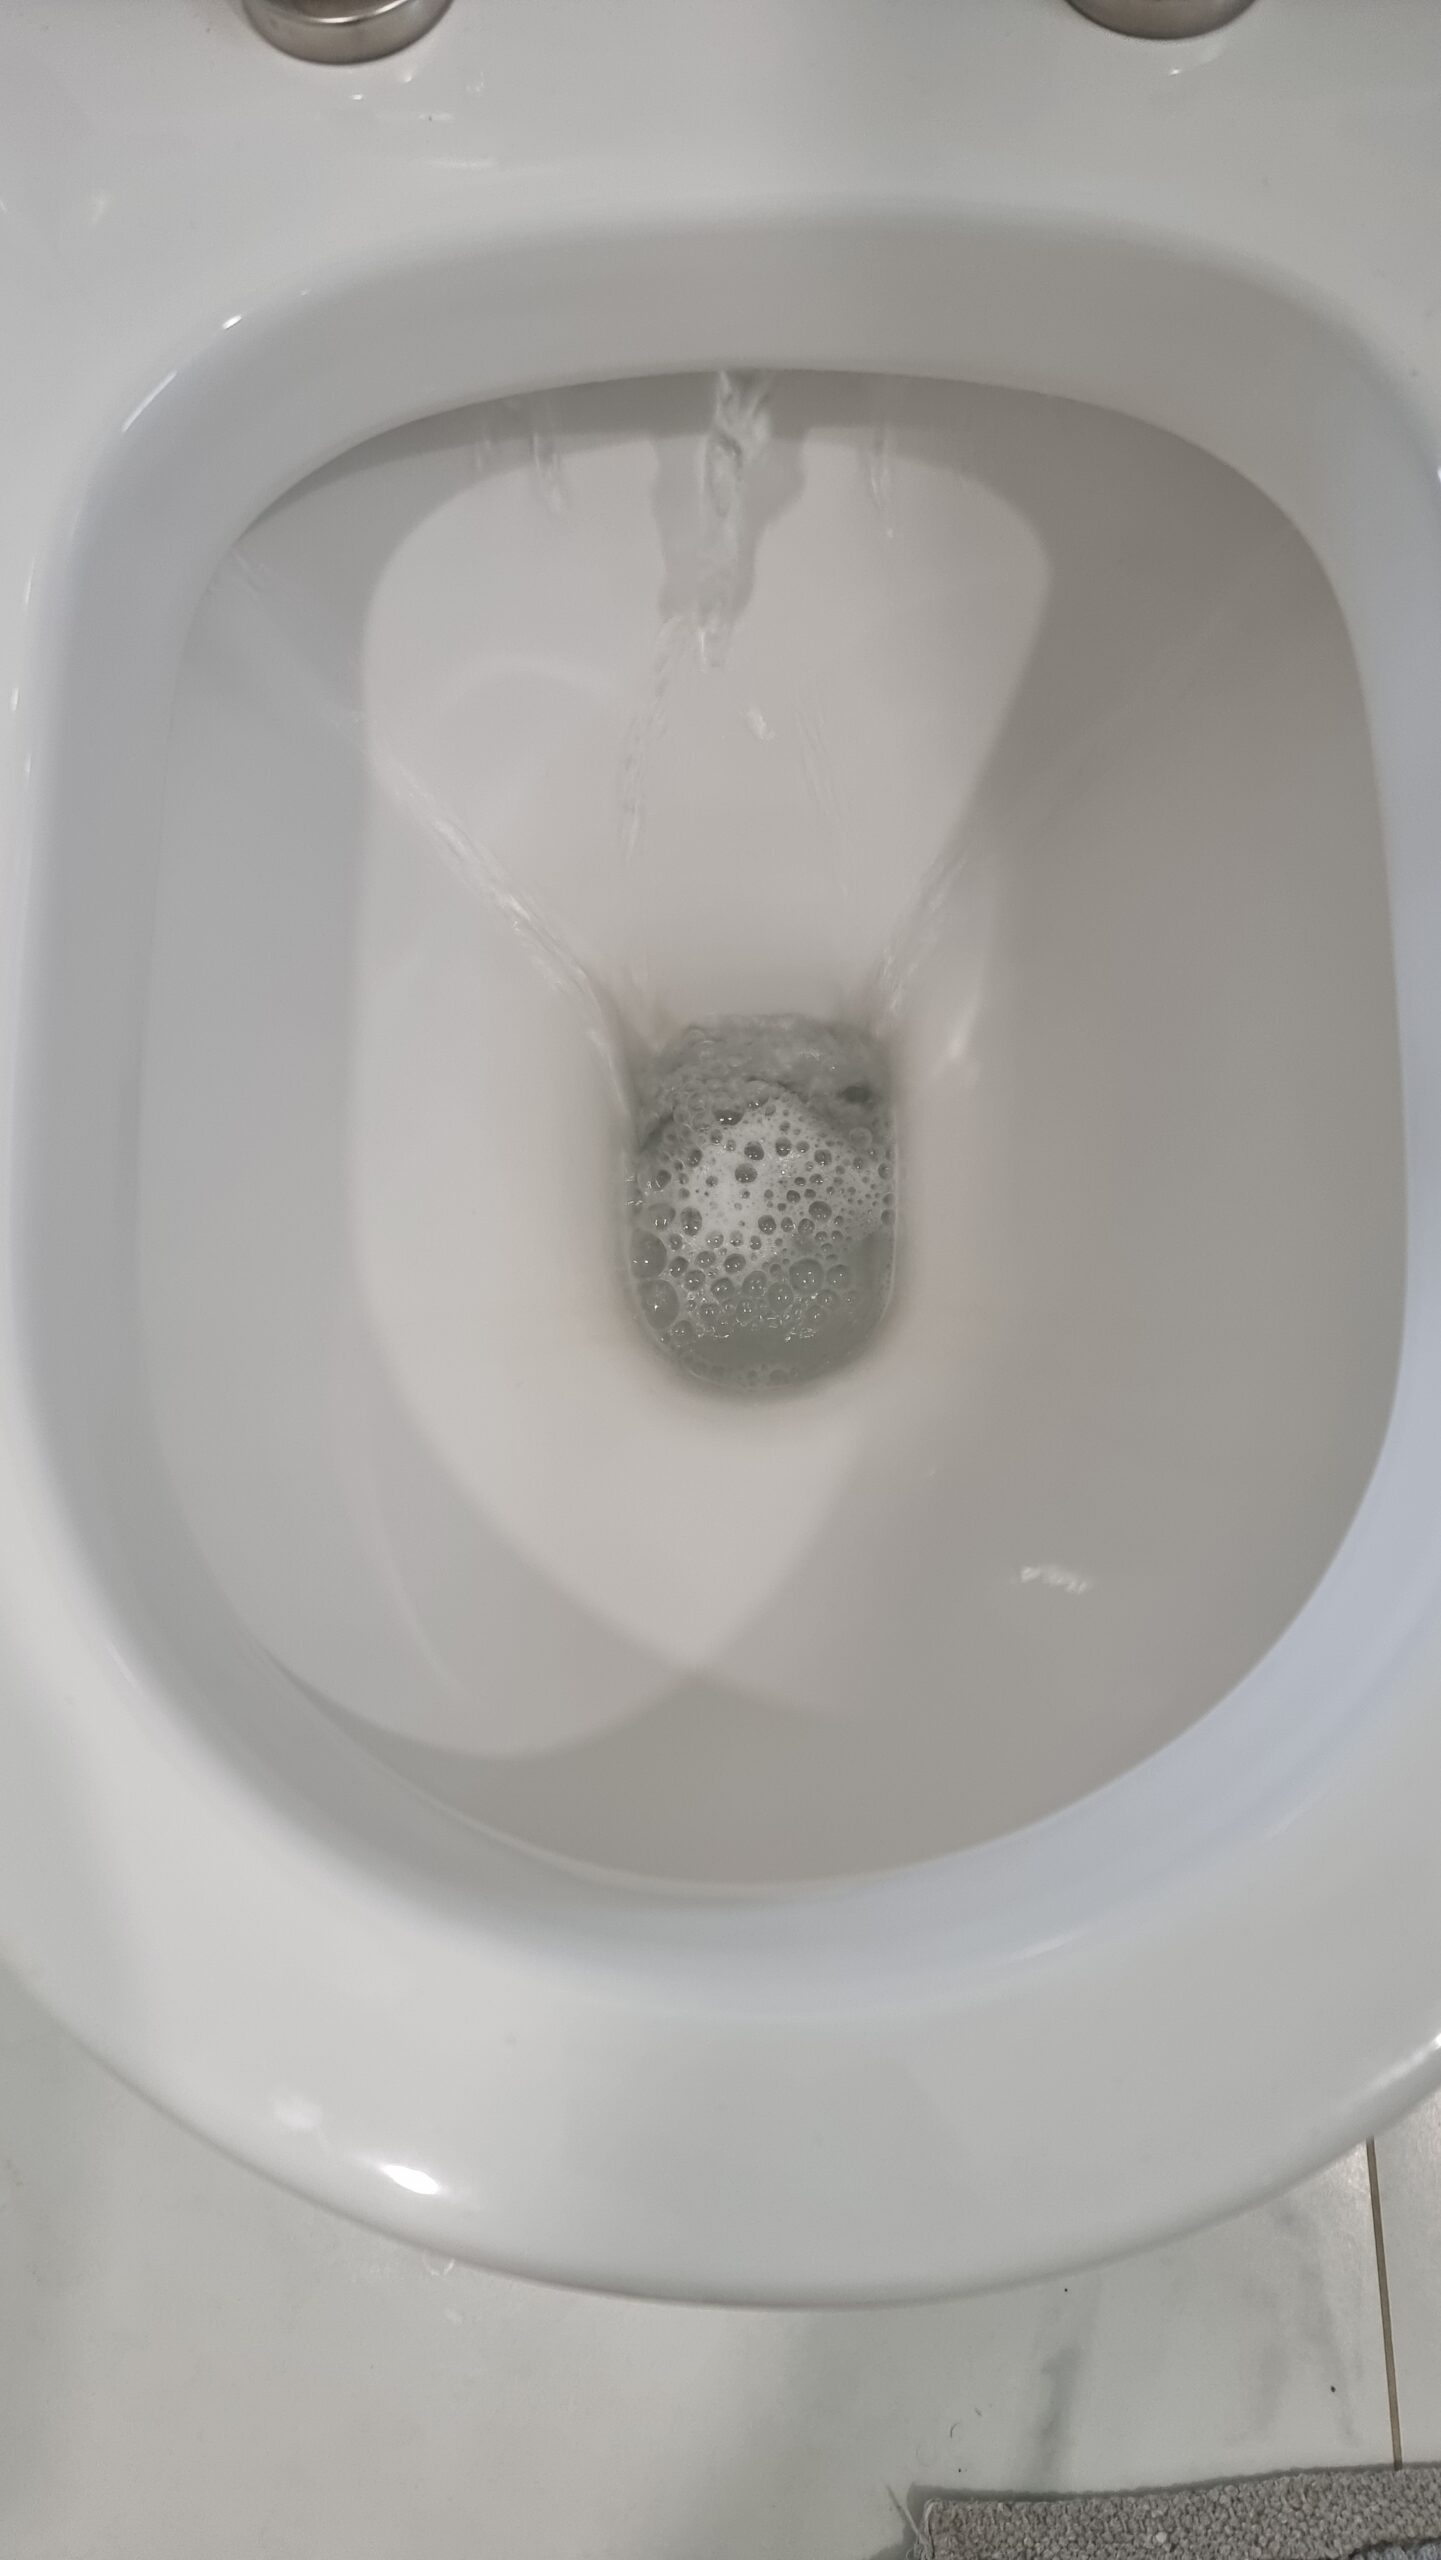 Leaking toilets can cause wastage of water as well as money; contact us to get your toilet repaired or replaced